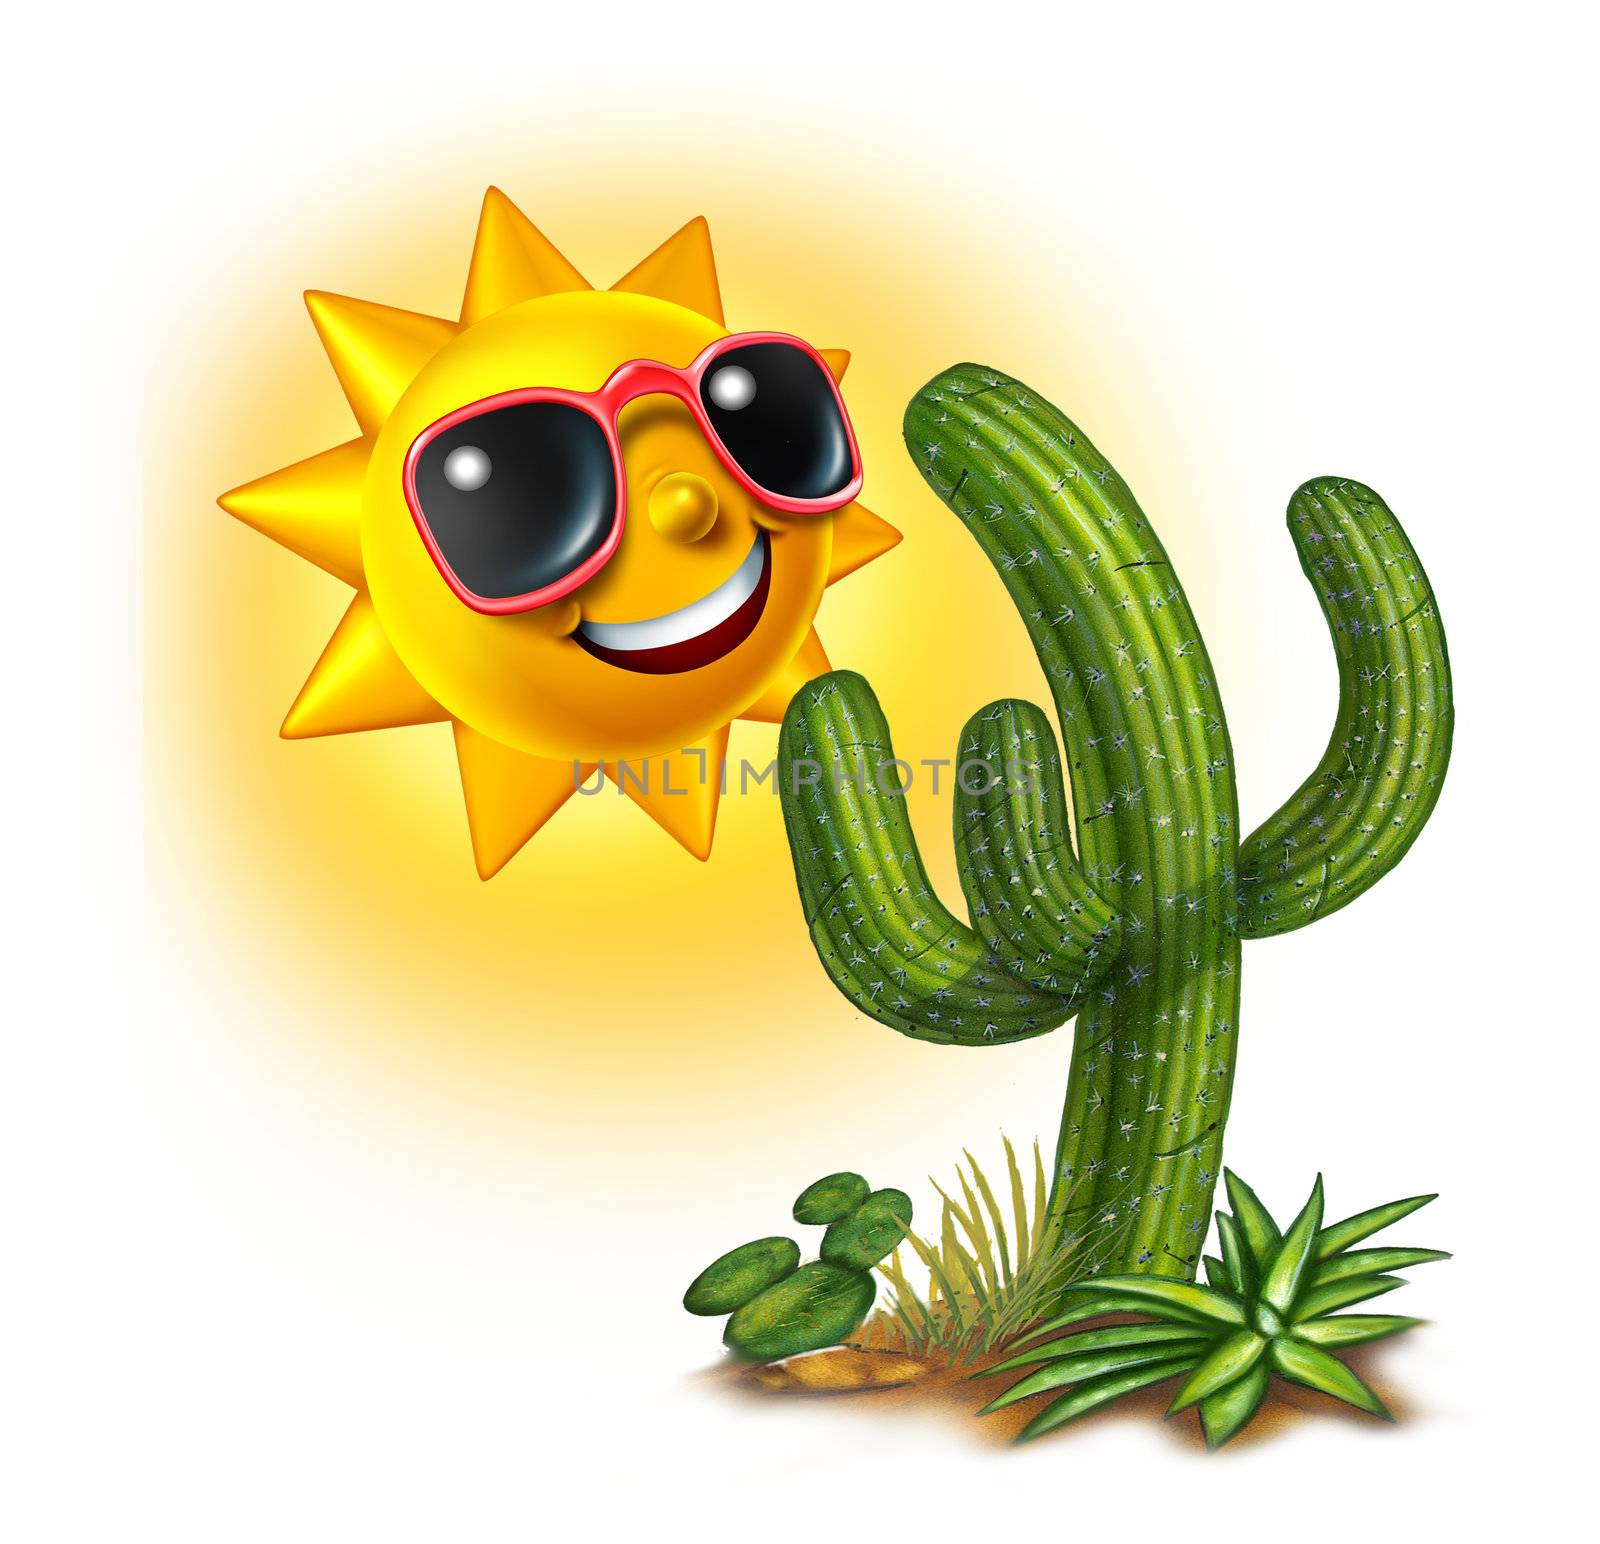 Cactus and sun character smiling and happy with dark glasses as a hot tropical summer fun concept on a white background.